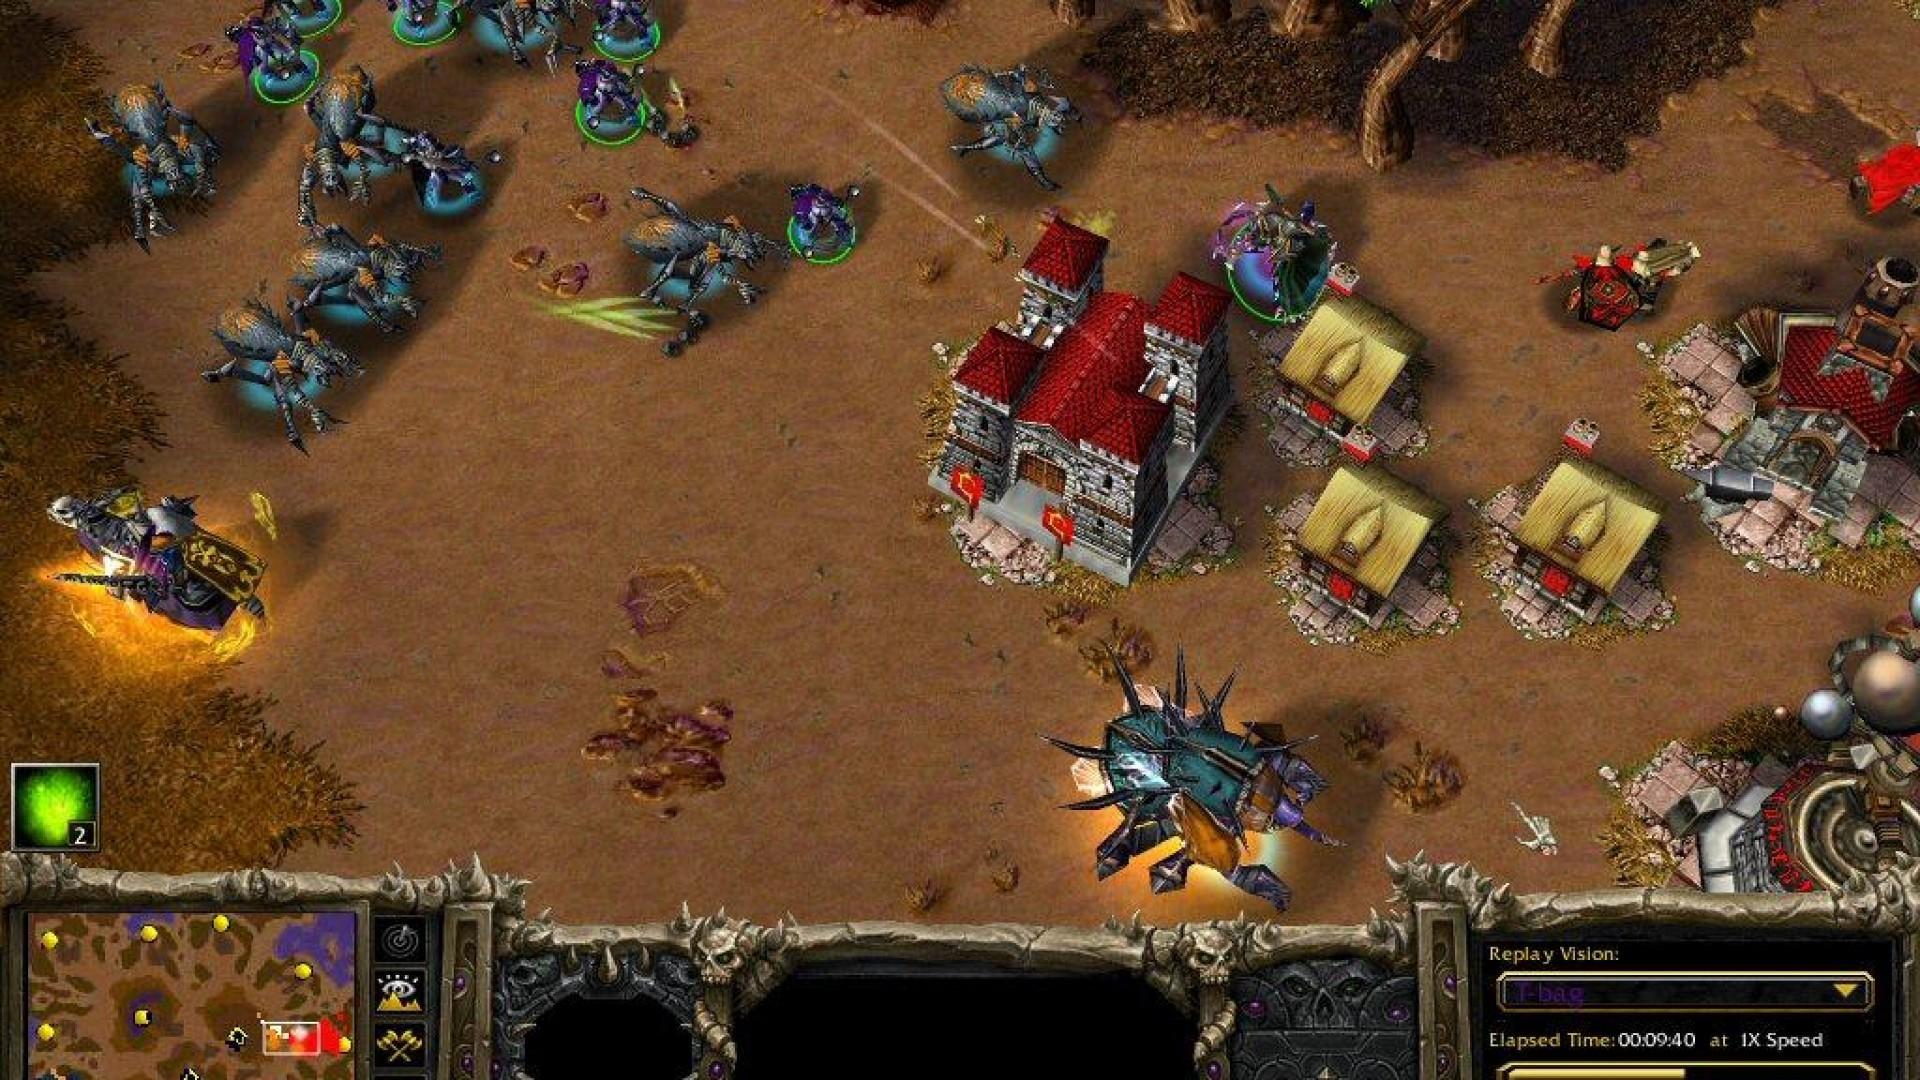 warcraft 3 reign of chaos download free full game